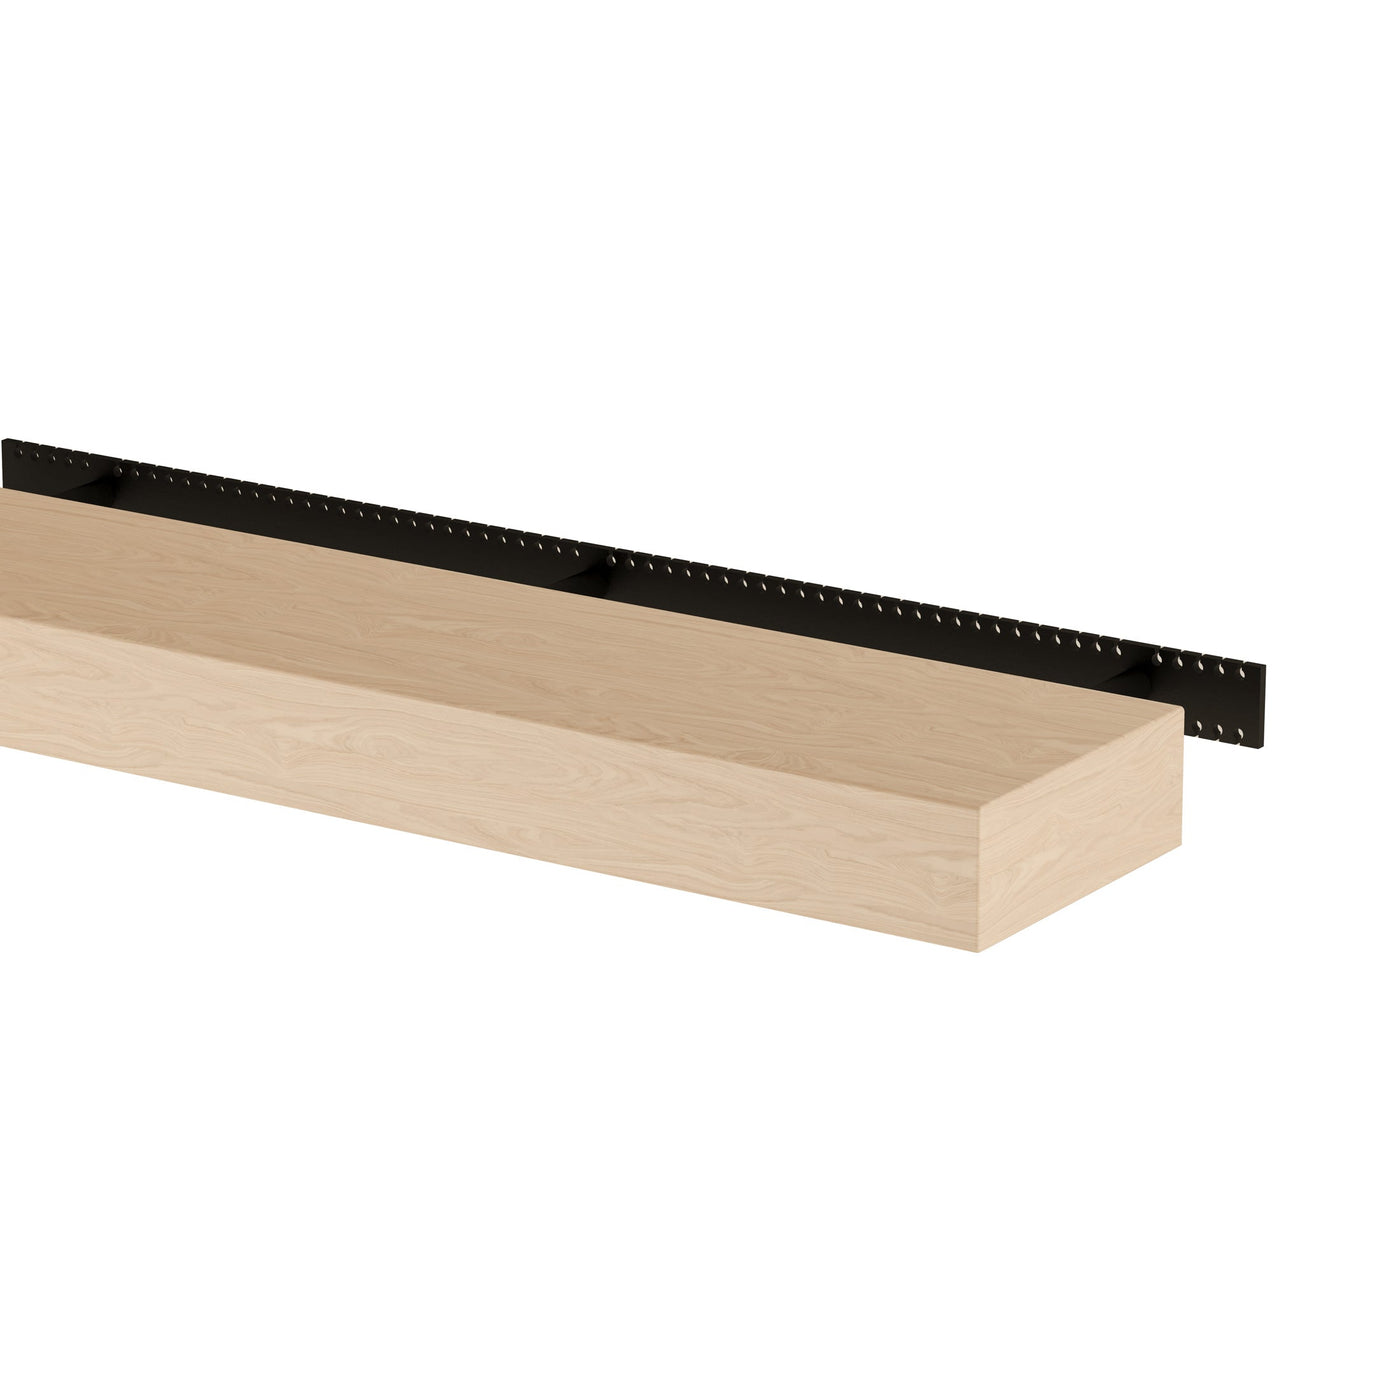 Floating Shelf- Cotton White Oak - 4 Inches Thick